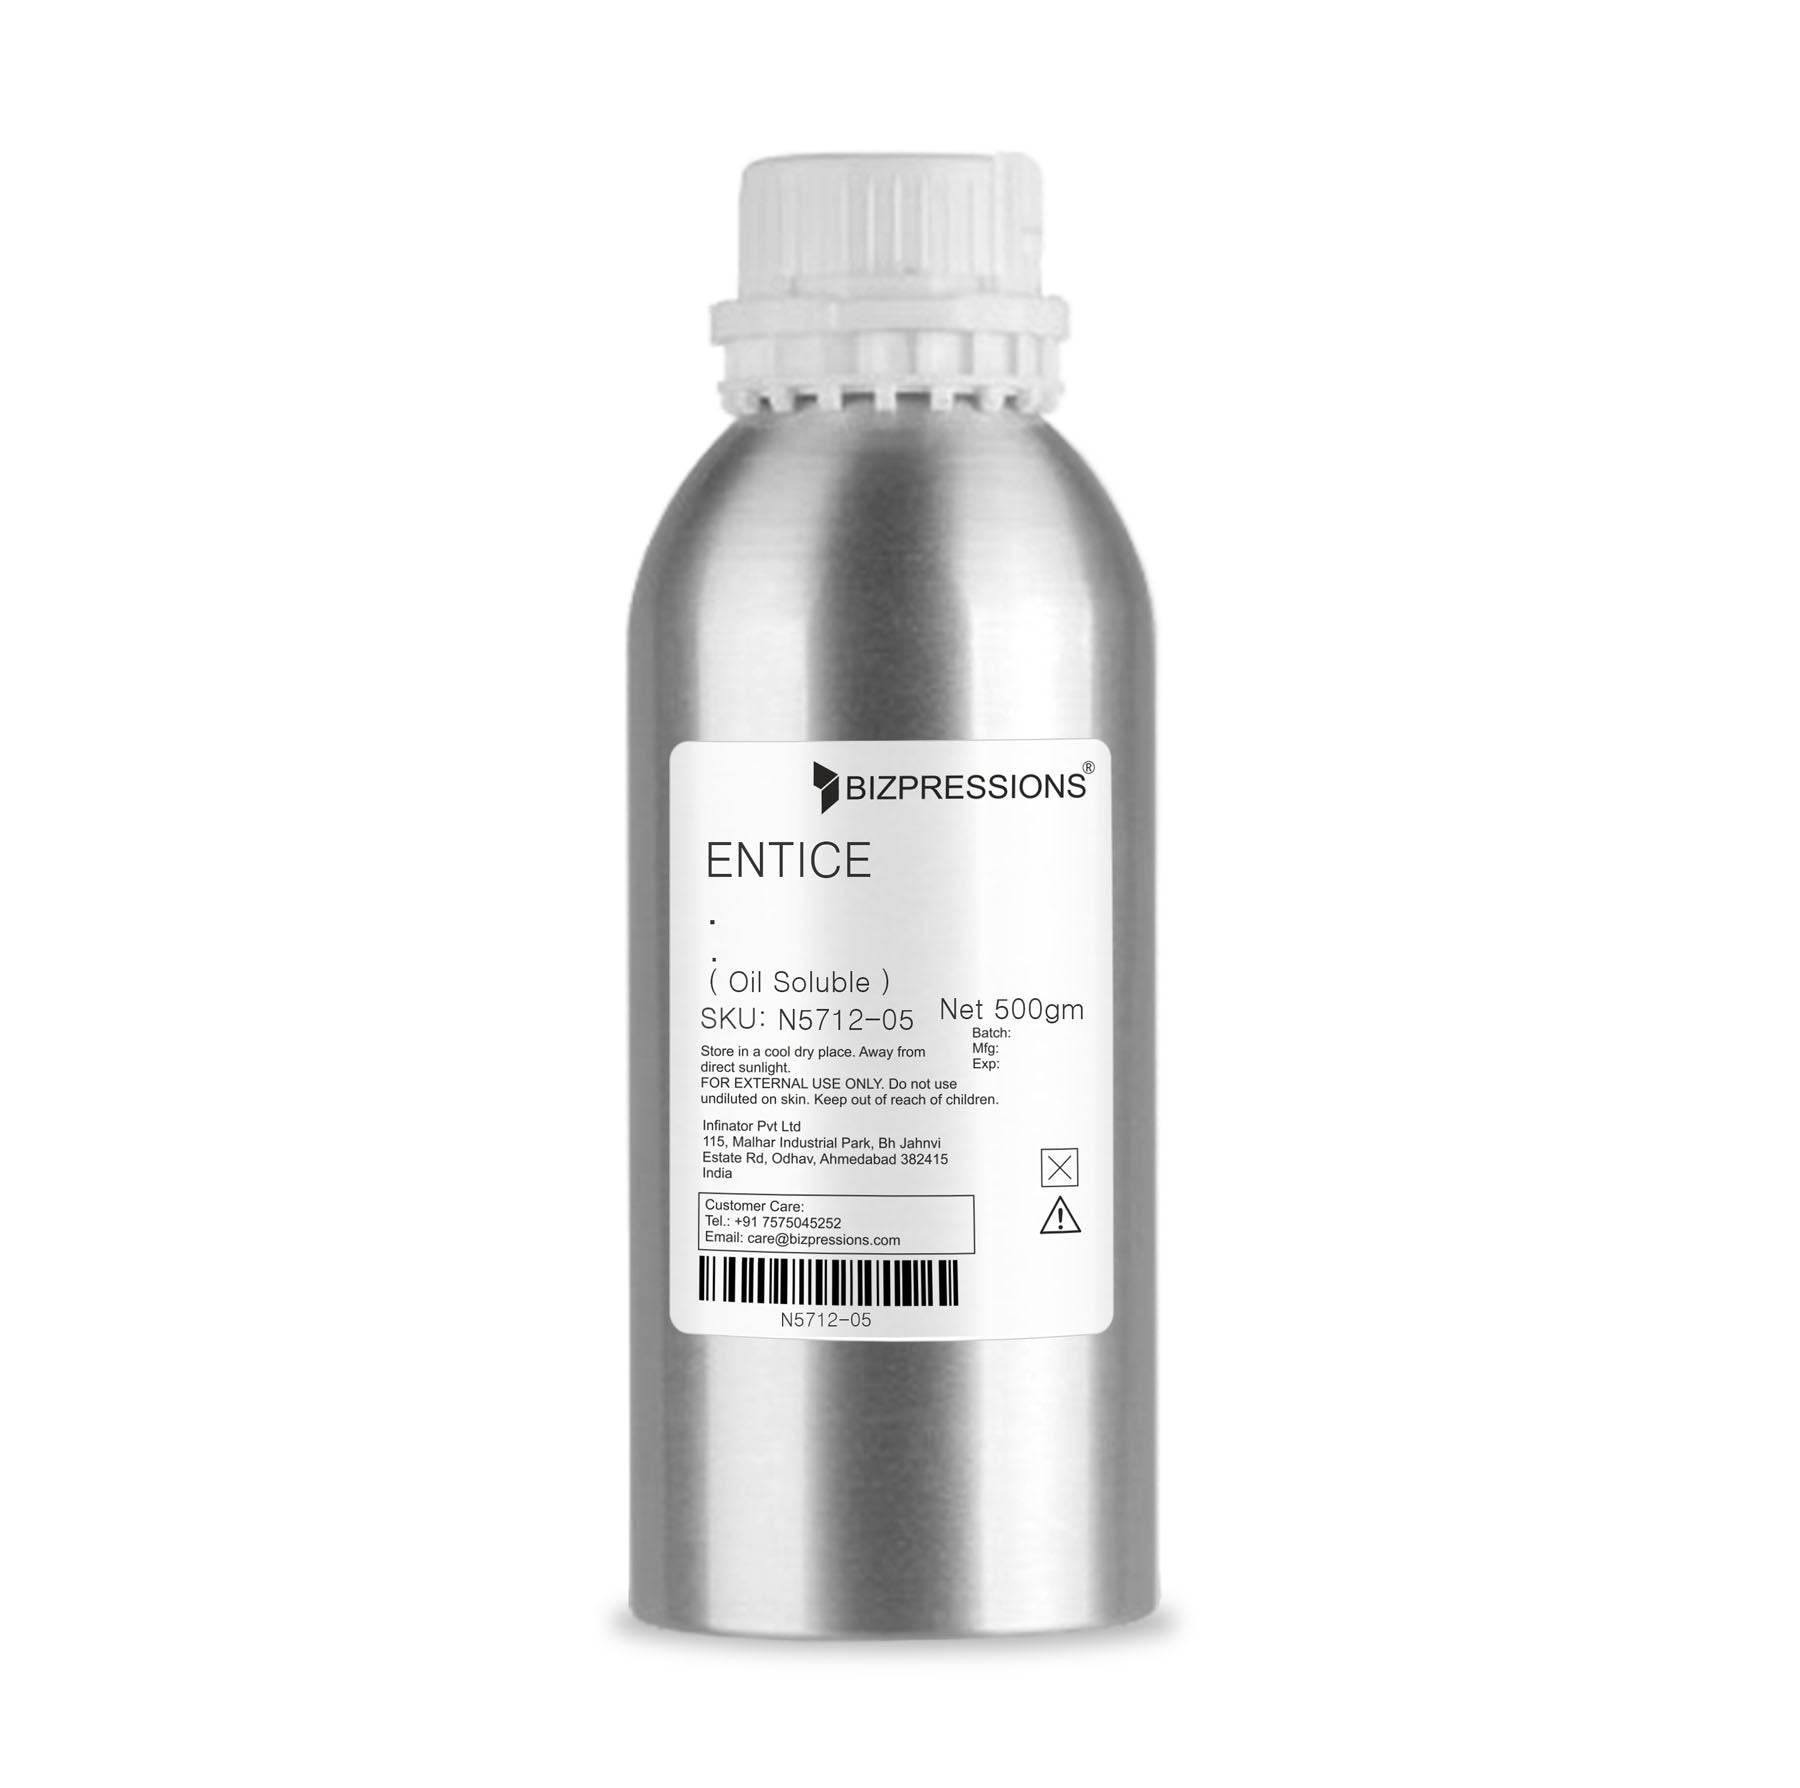 ENTICE - Fragrance ( Oil Soluble ) - 500 gm